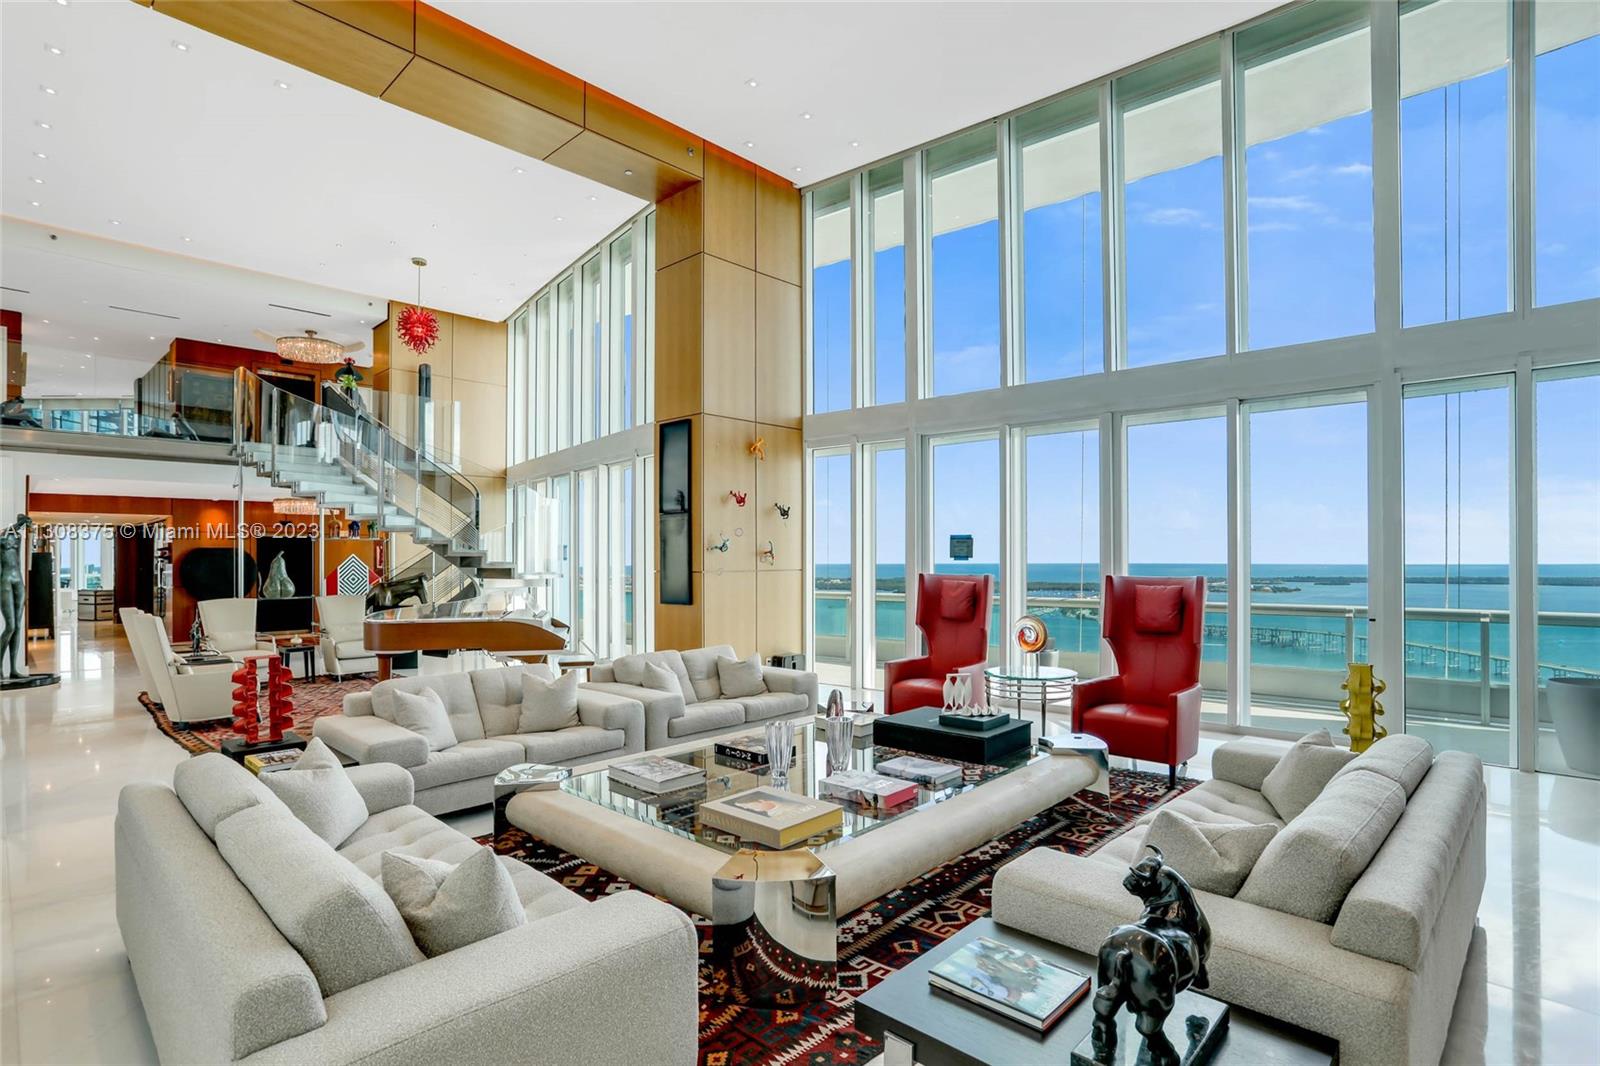 This is an absolutely gorgeous and stunning duplex  in the sky with 180 degree views of Biscayne Bay, Miami Beach, Fisher Island, Key Biscayne and beyond and city scape views from the west side.  Completely updated in the most exquisite taste and sophistication. All new marble floors. This is a home for the most cultured and elegant buyer. No expense was spared. Enjoy your own private pool (under renovation), 4 assigned parking spaces (2063,2086,2087,2088) and storage #B-060. Marina slip #13 with dimensions 27' x 97' x 5'25'' fits up to a 90' yacht. This is a first class building offering privacy, full services and an outstanding way of life! To see it is to want it!